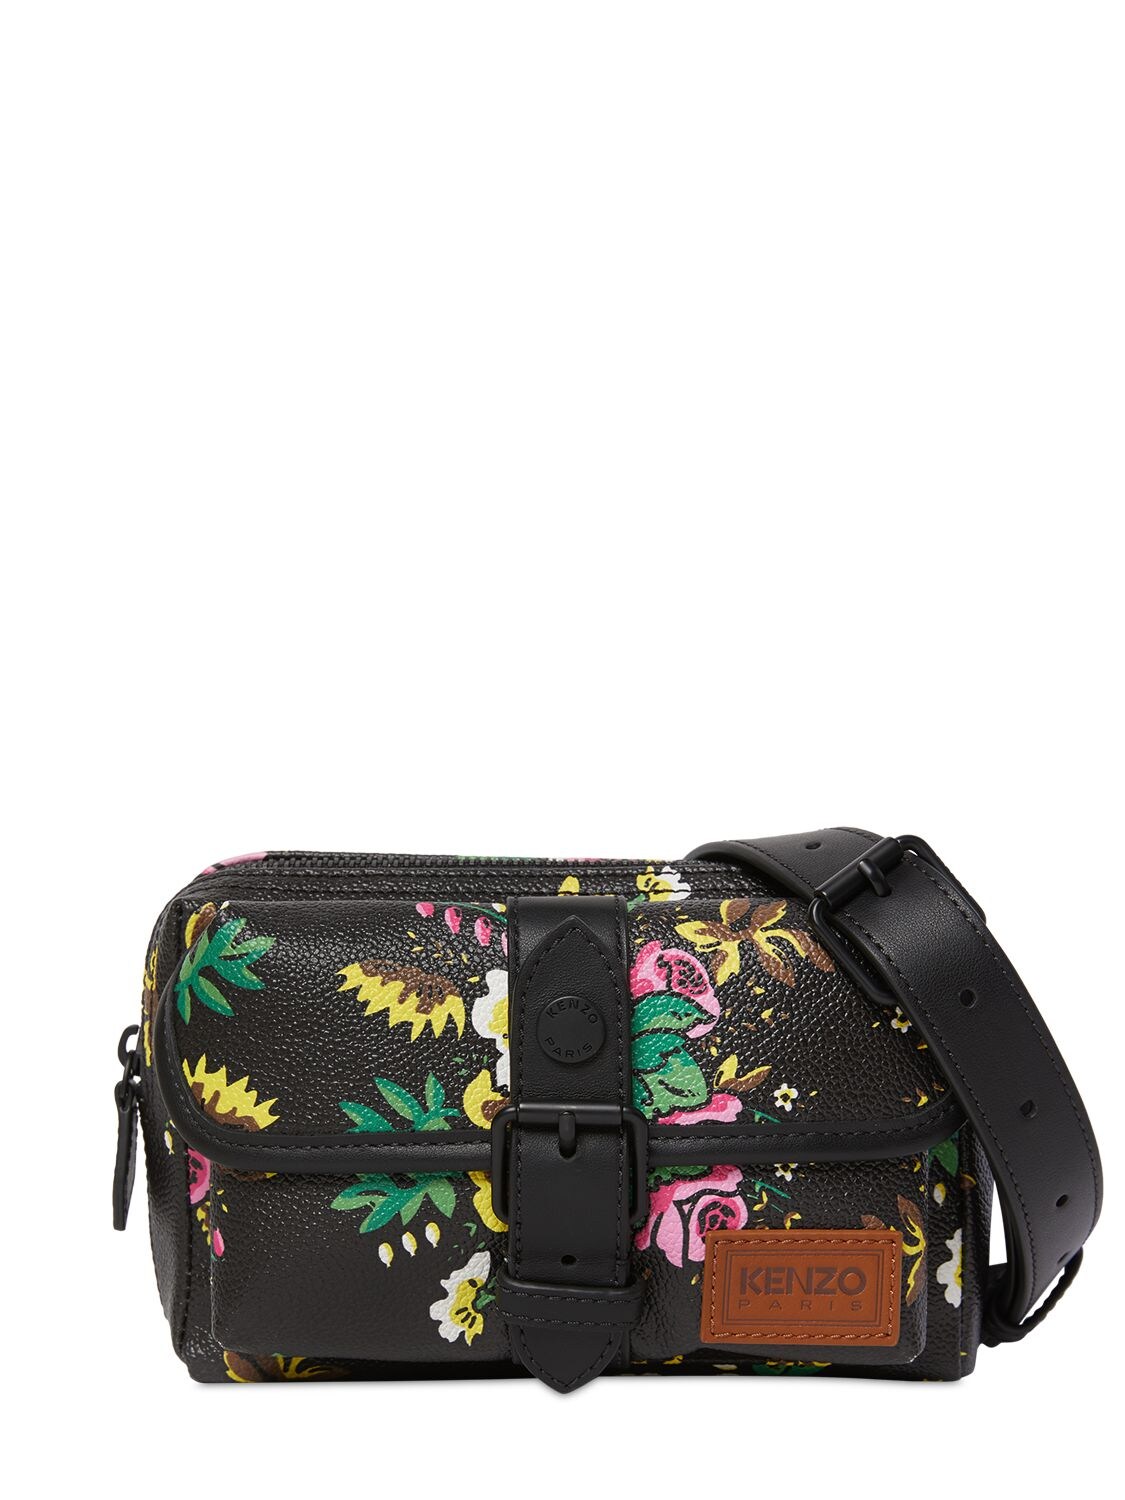 Kenzo Mini Pop Floral Printed Faux Leather Bag In Black